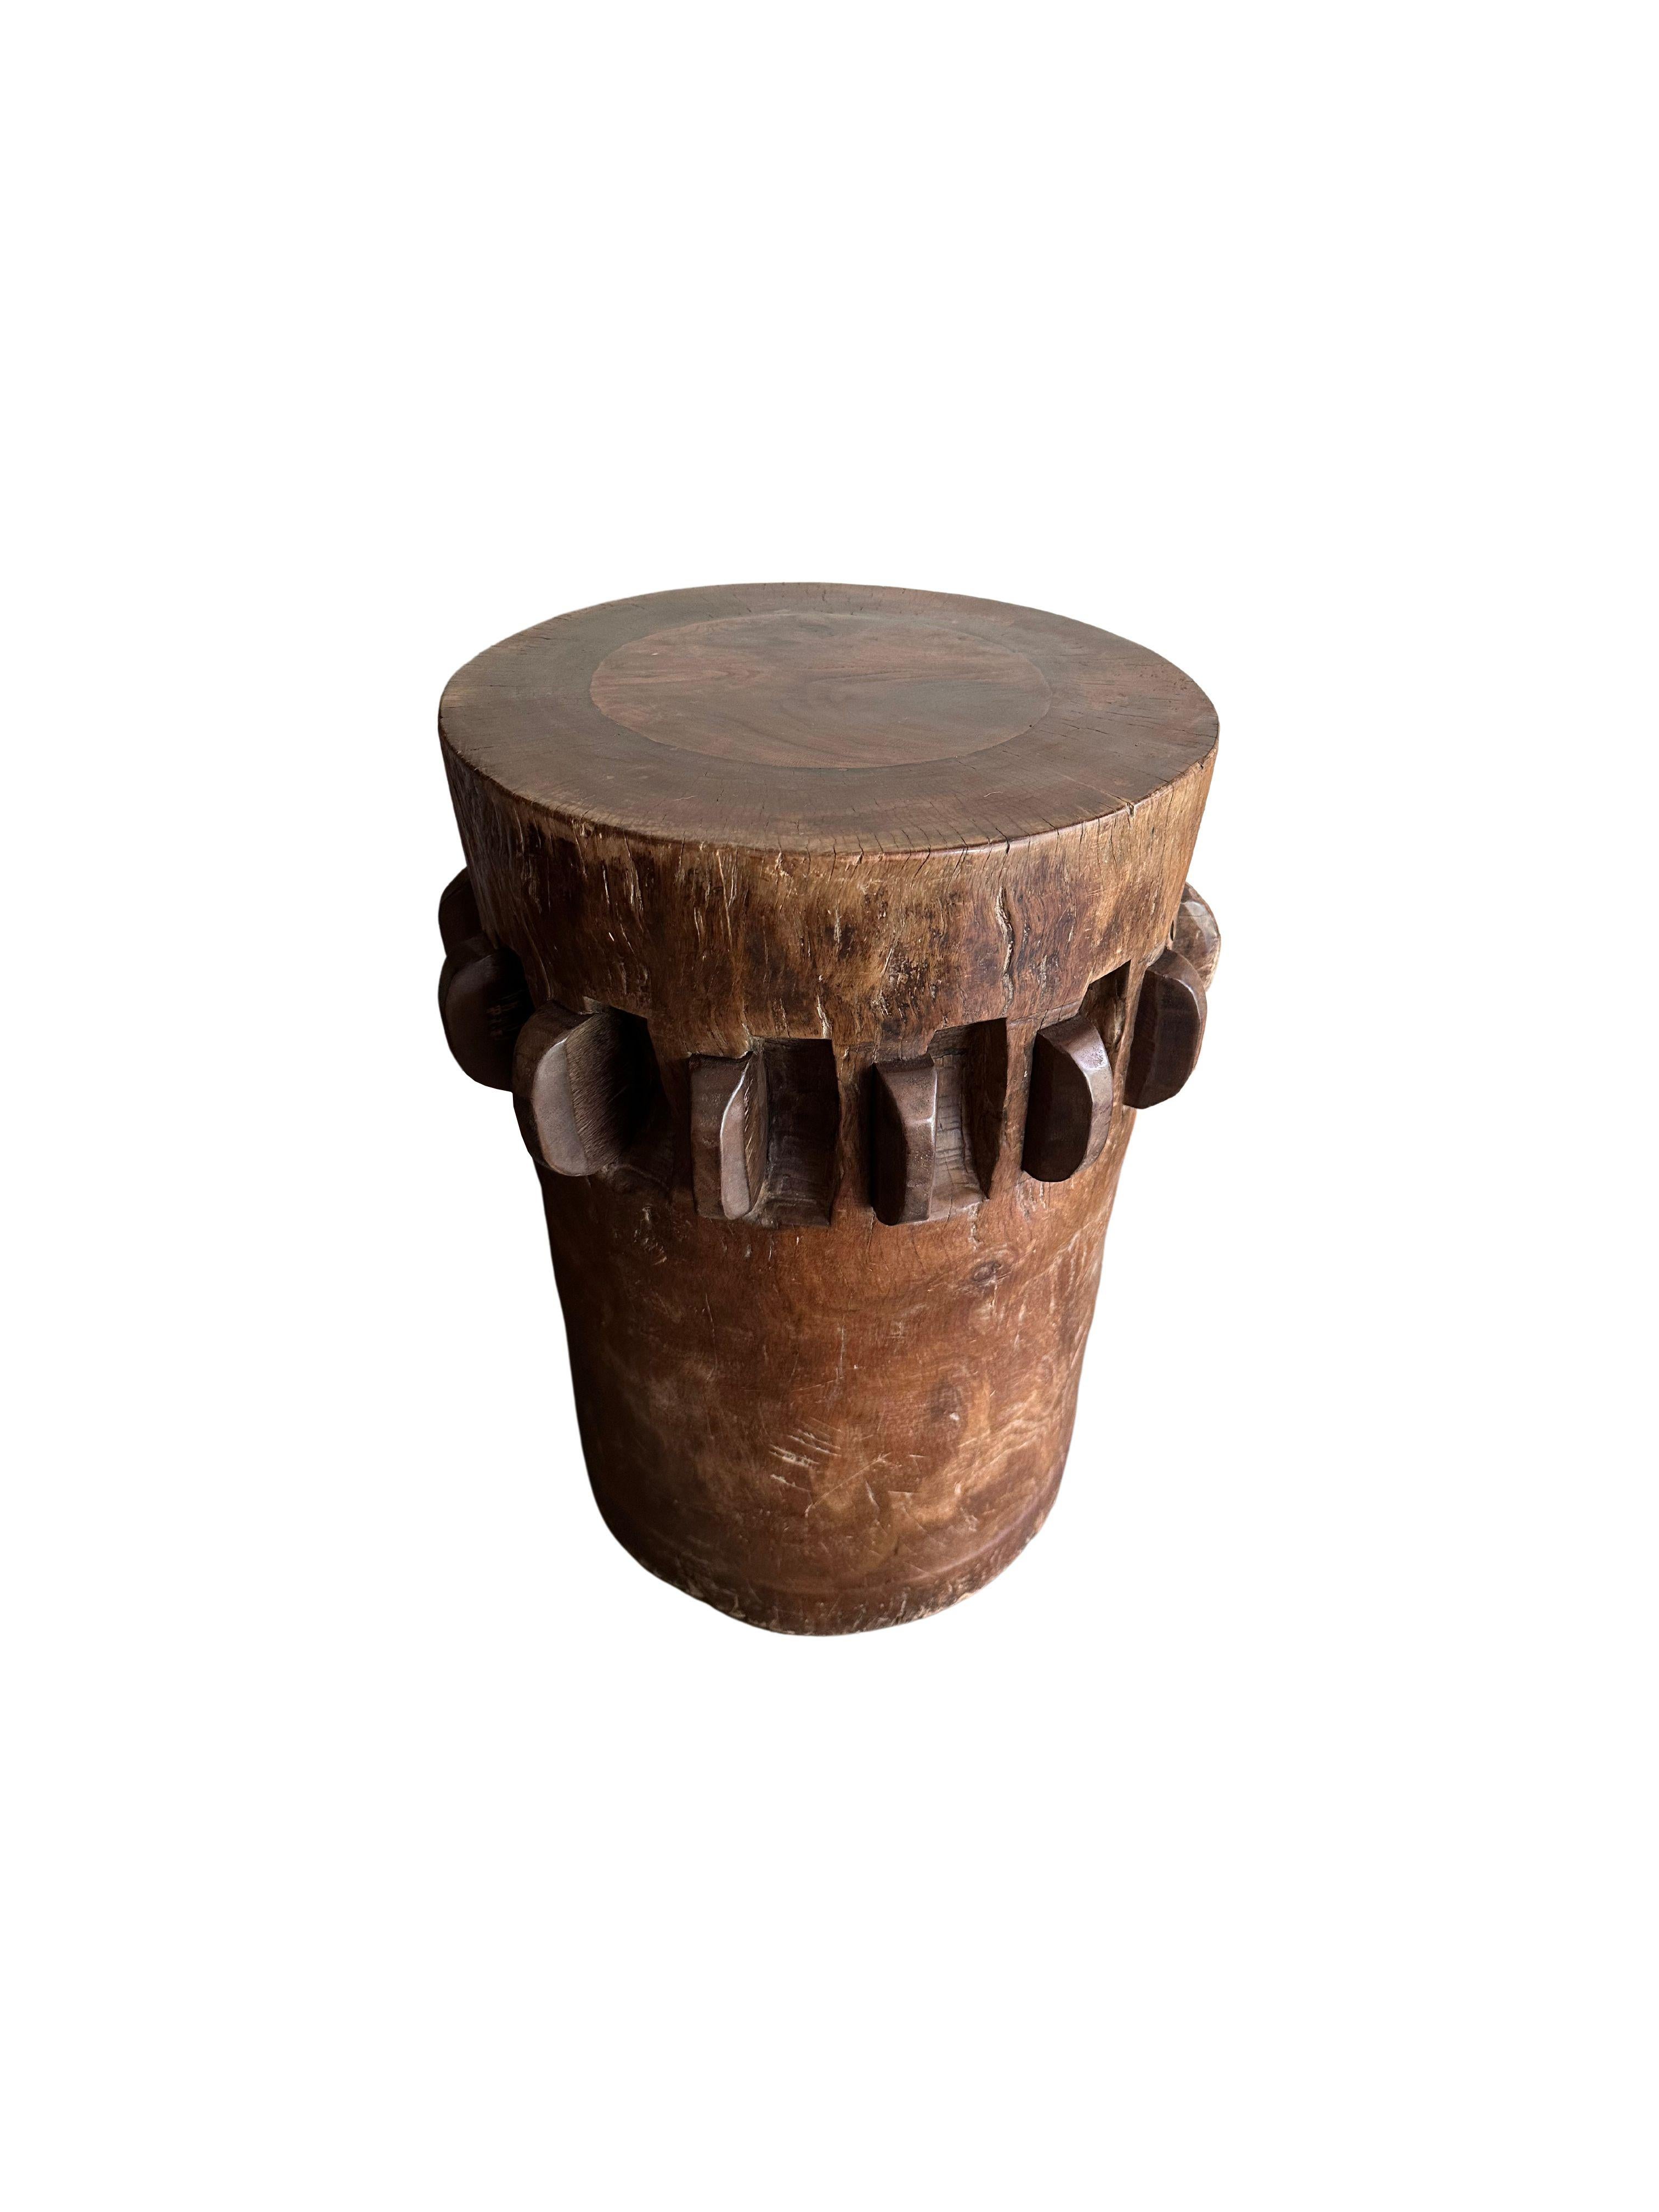 Mid-20th Century Solid Teak Sugar Cane Crusher / Grinder from Java, Indonesia c. 1950